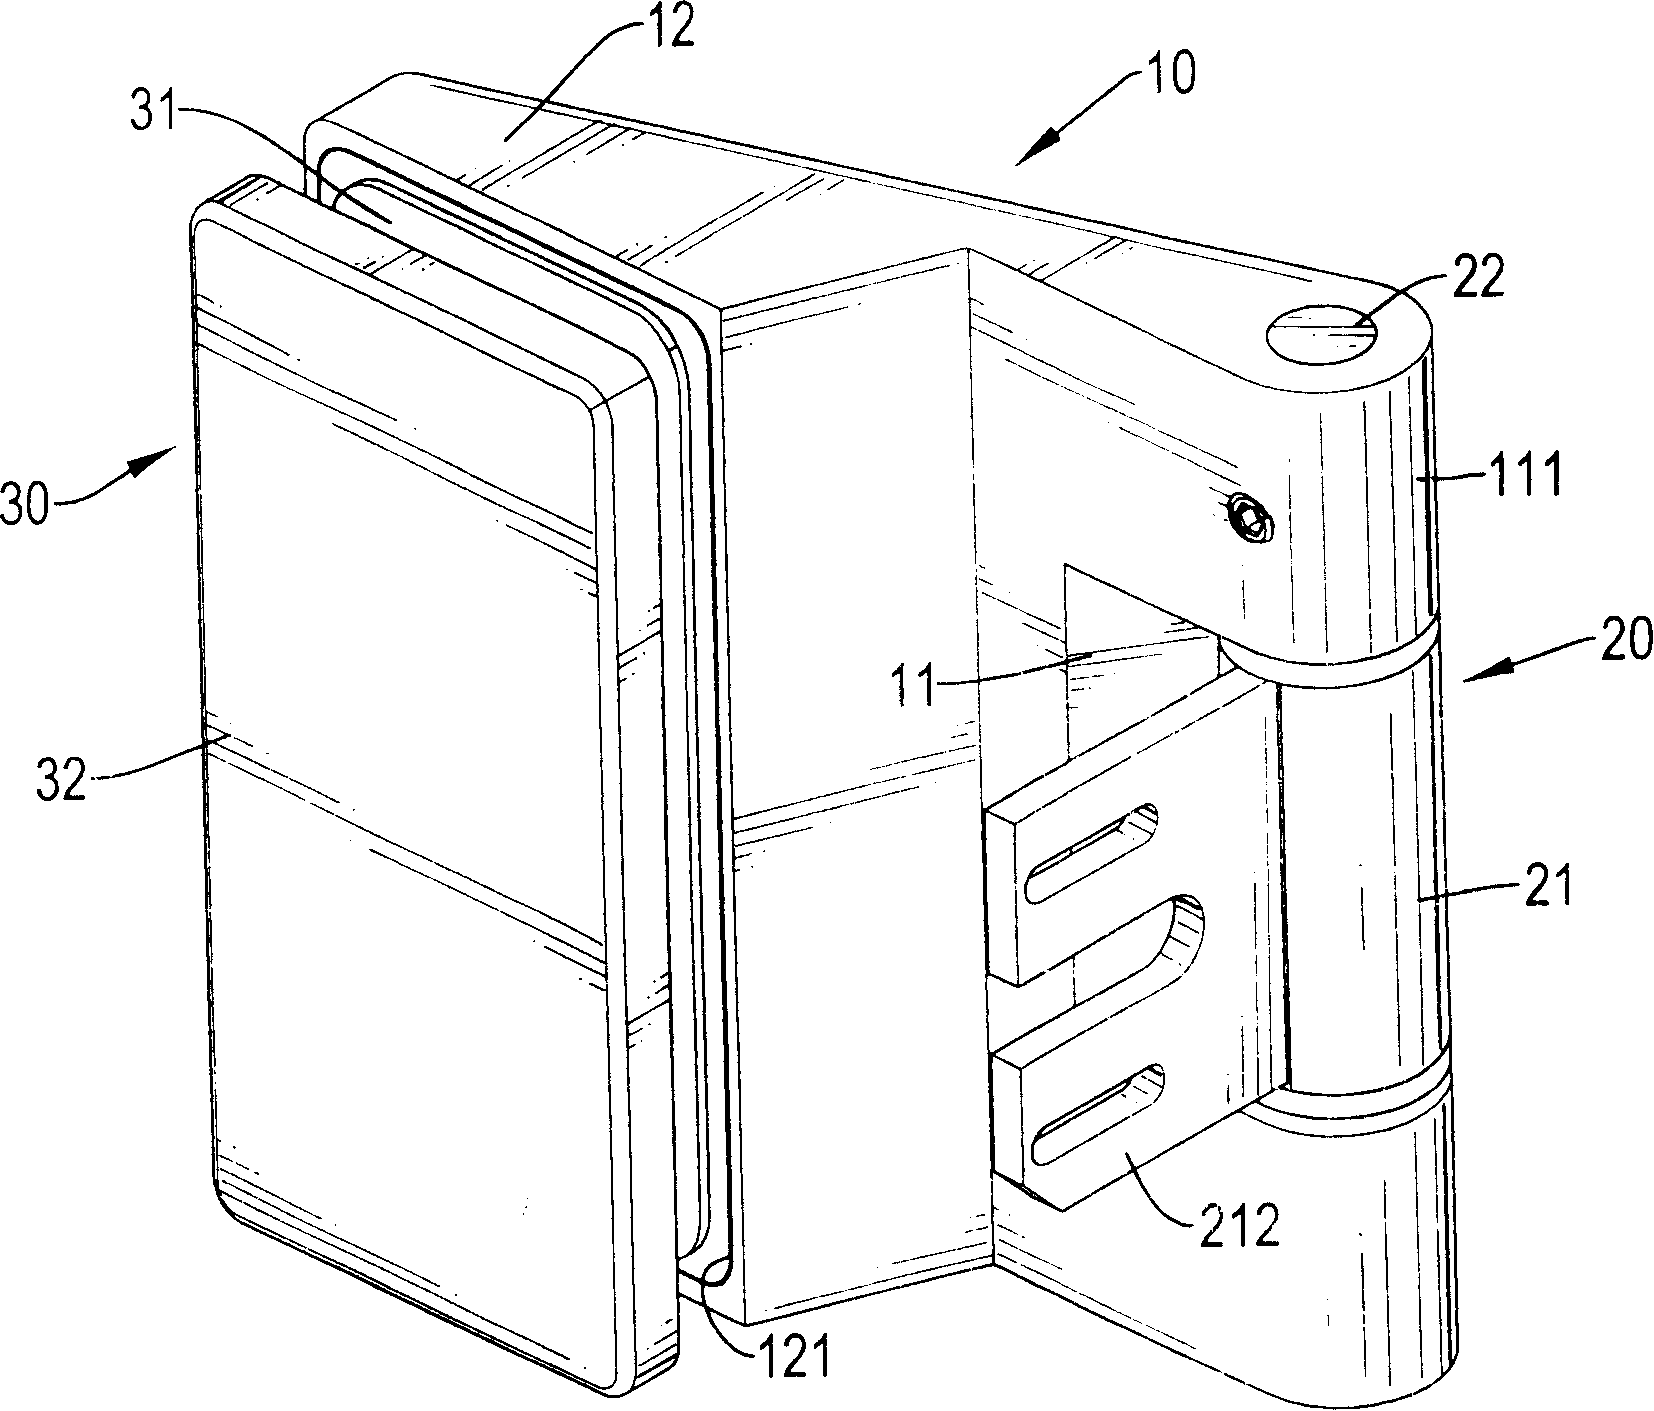 Hinge with non-frame glass door opening one side